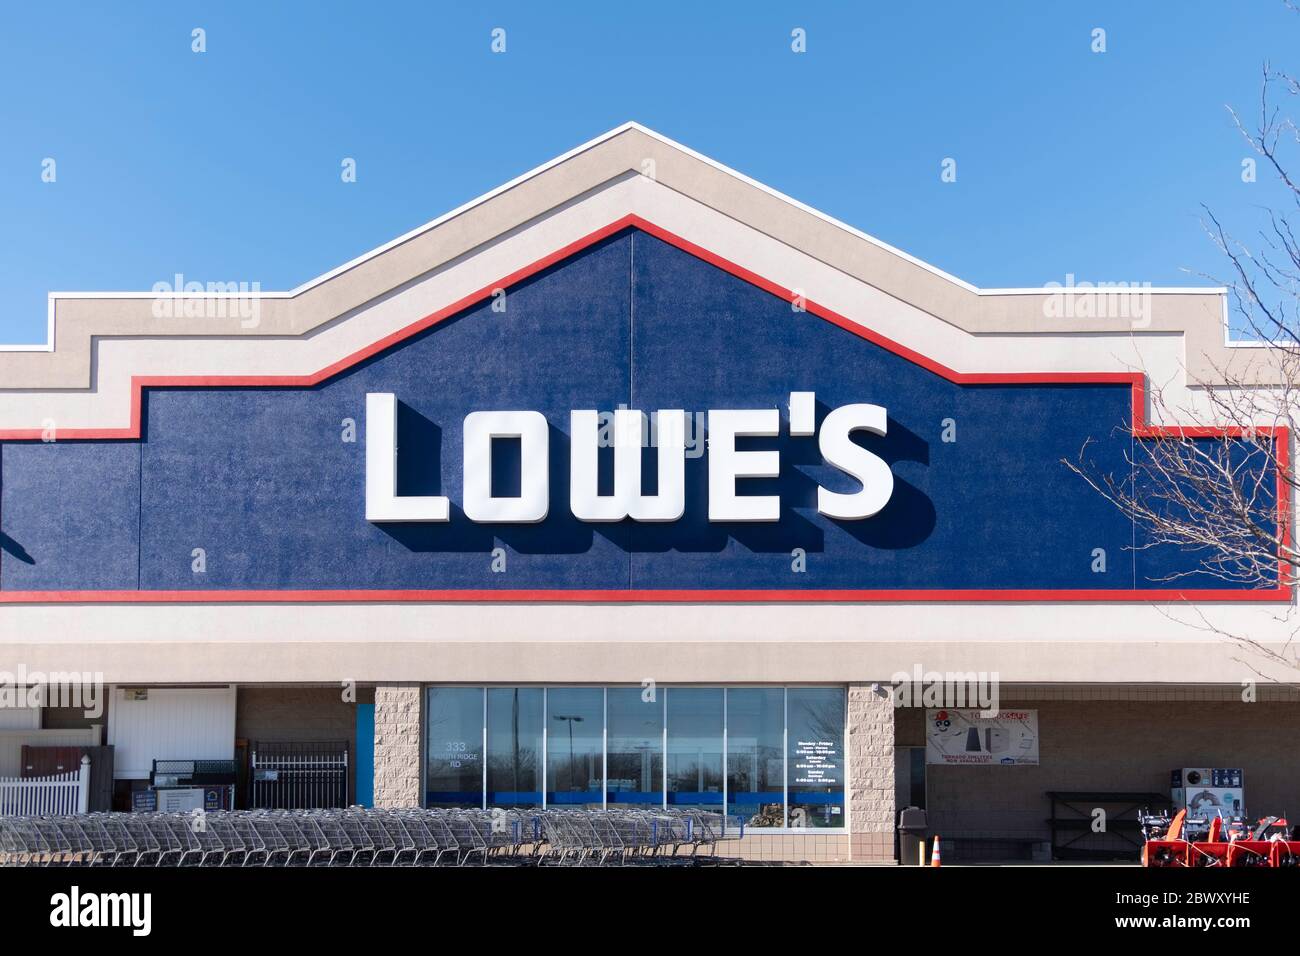 Exterior storefront and logo of Lowe's home improvement store in Wichita, Kansas, USA. Stock Photo